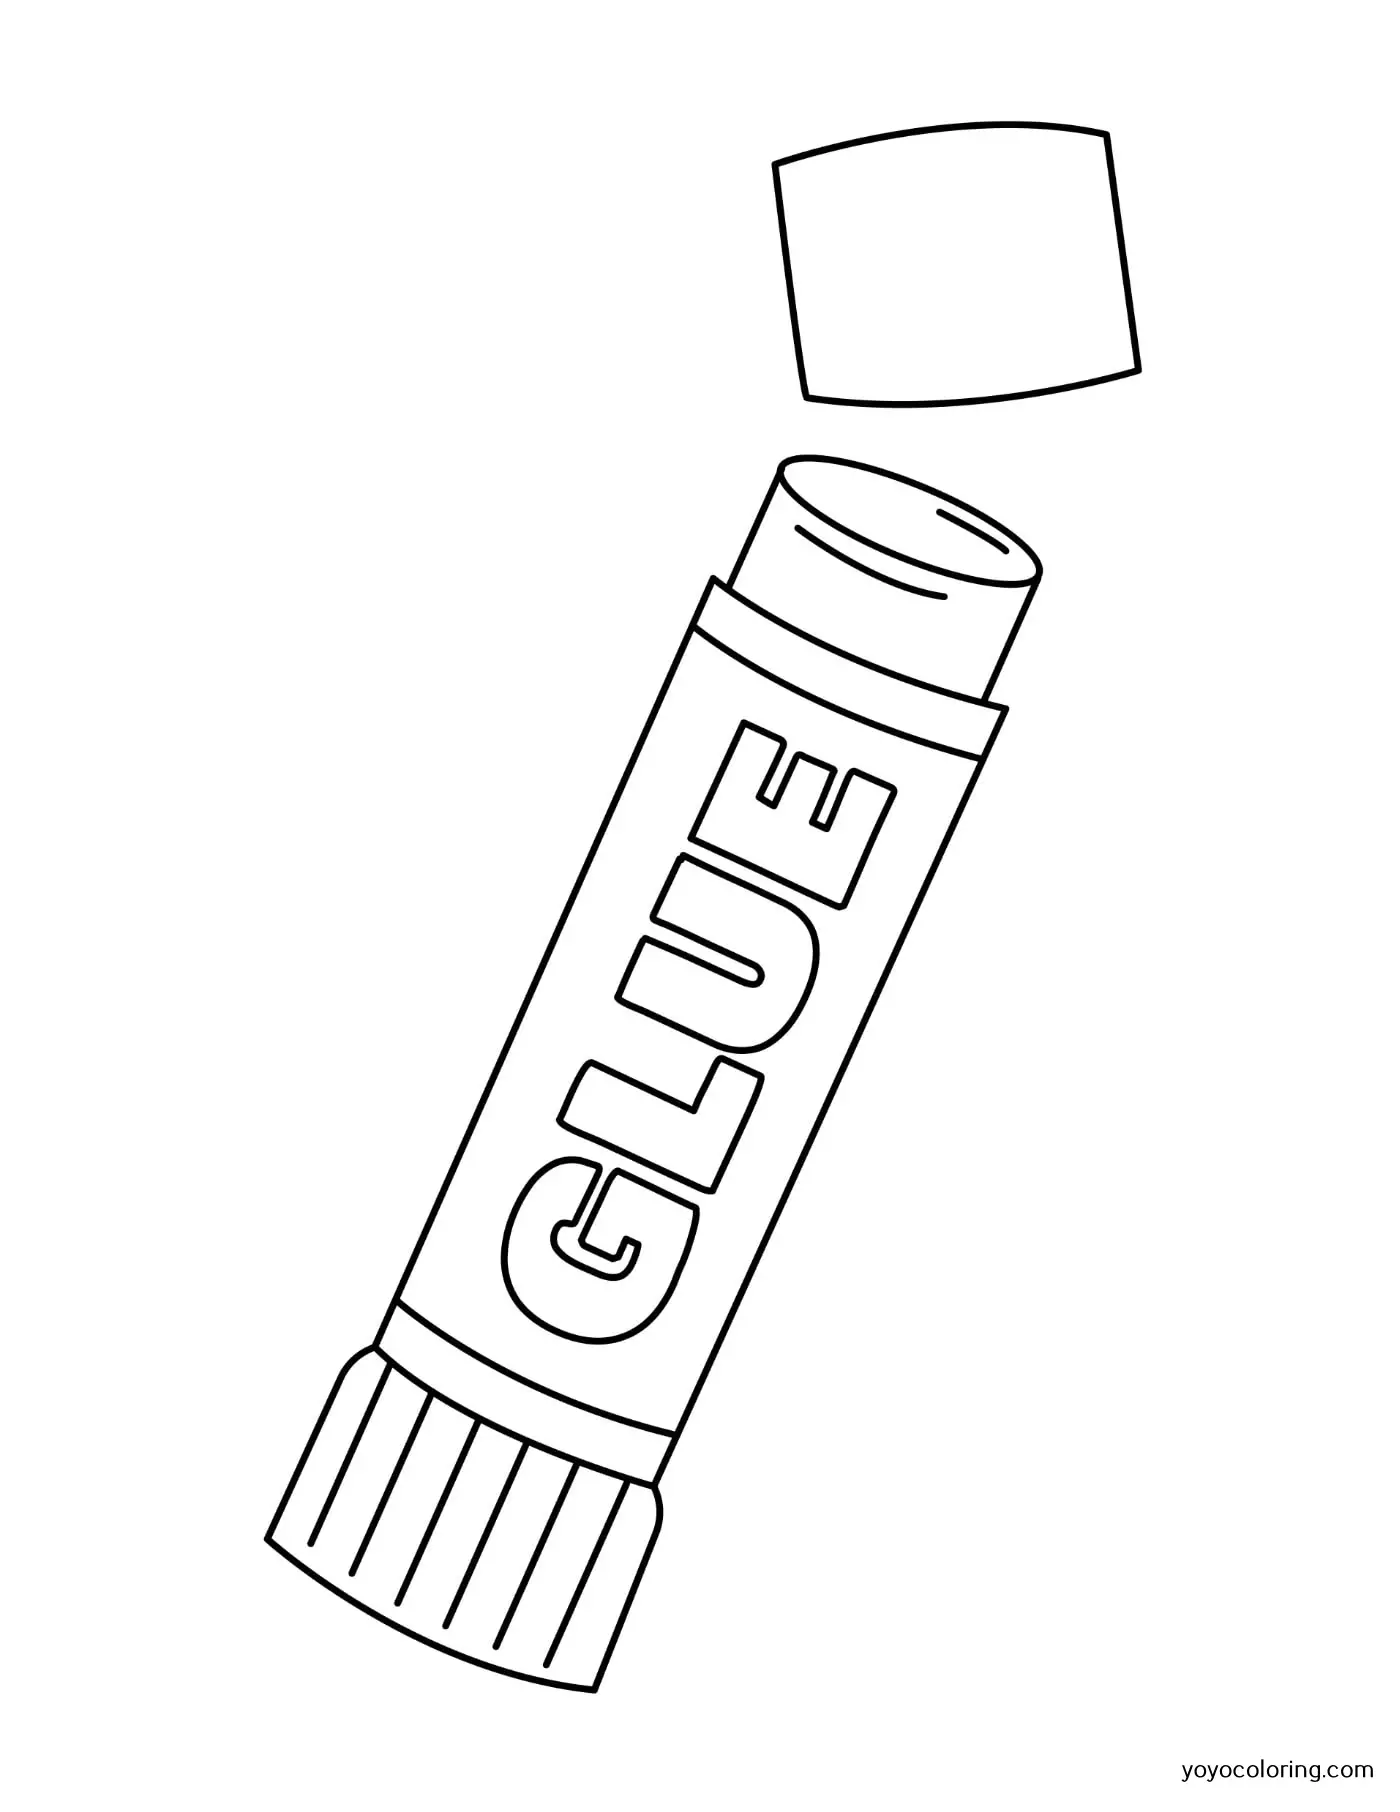 Glue stick coloring pages á printable painting template